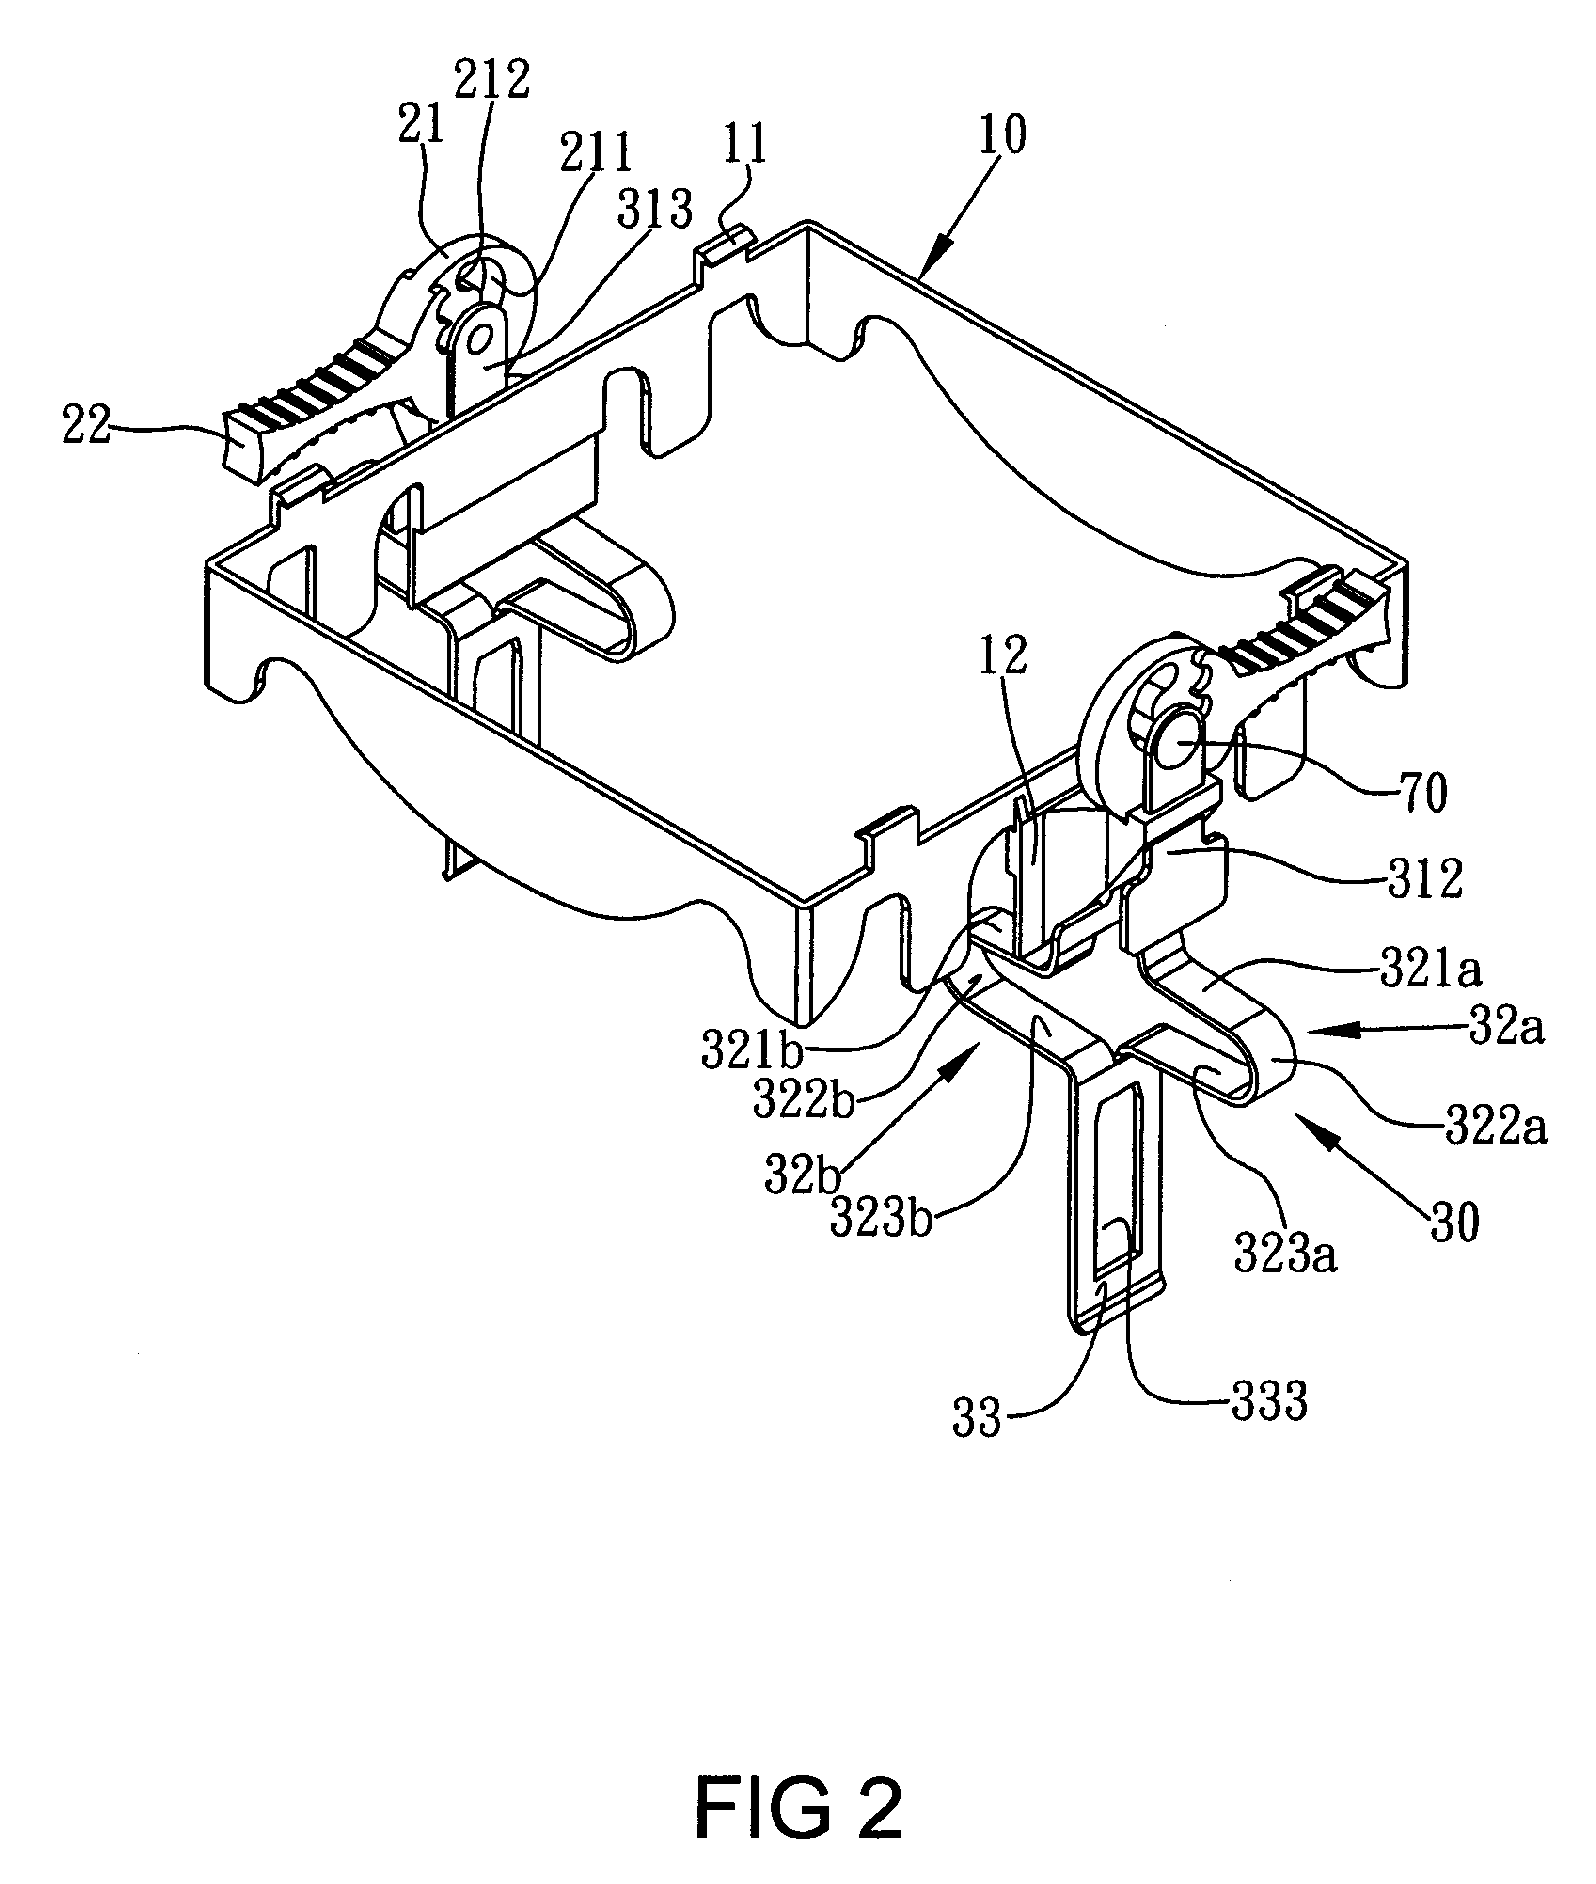 Retaining tool for a heat sink